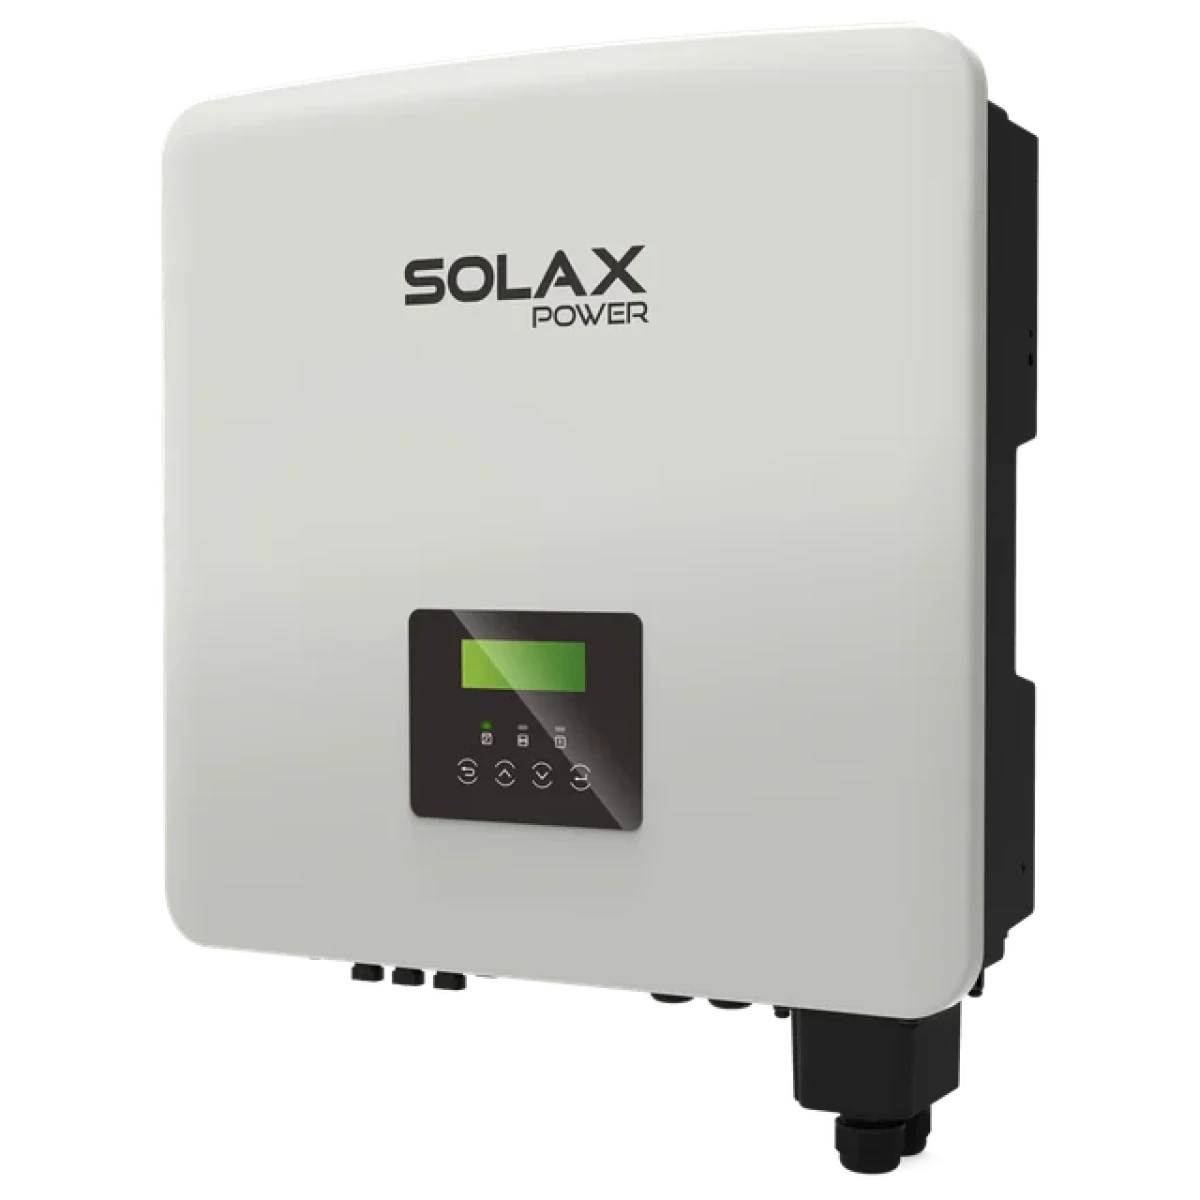 Picture of Solax Power inverter X3-Hybrid-5.0-D (three-phase) with unique emergency power system